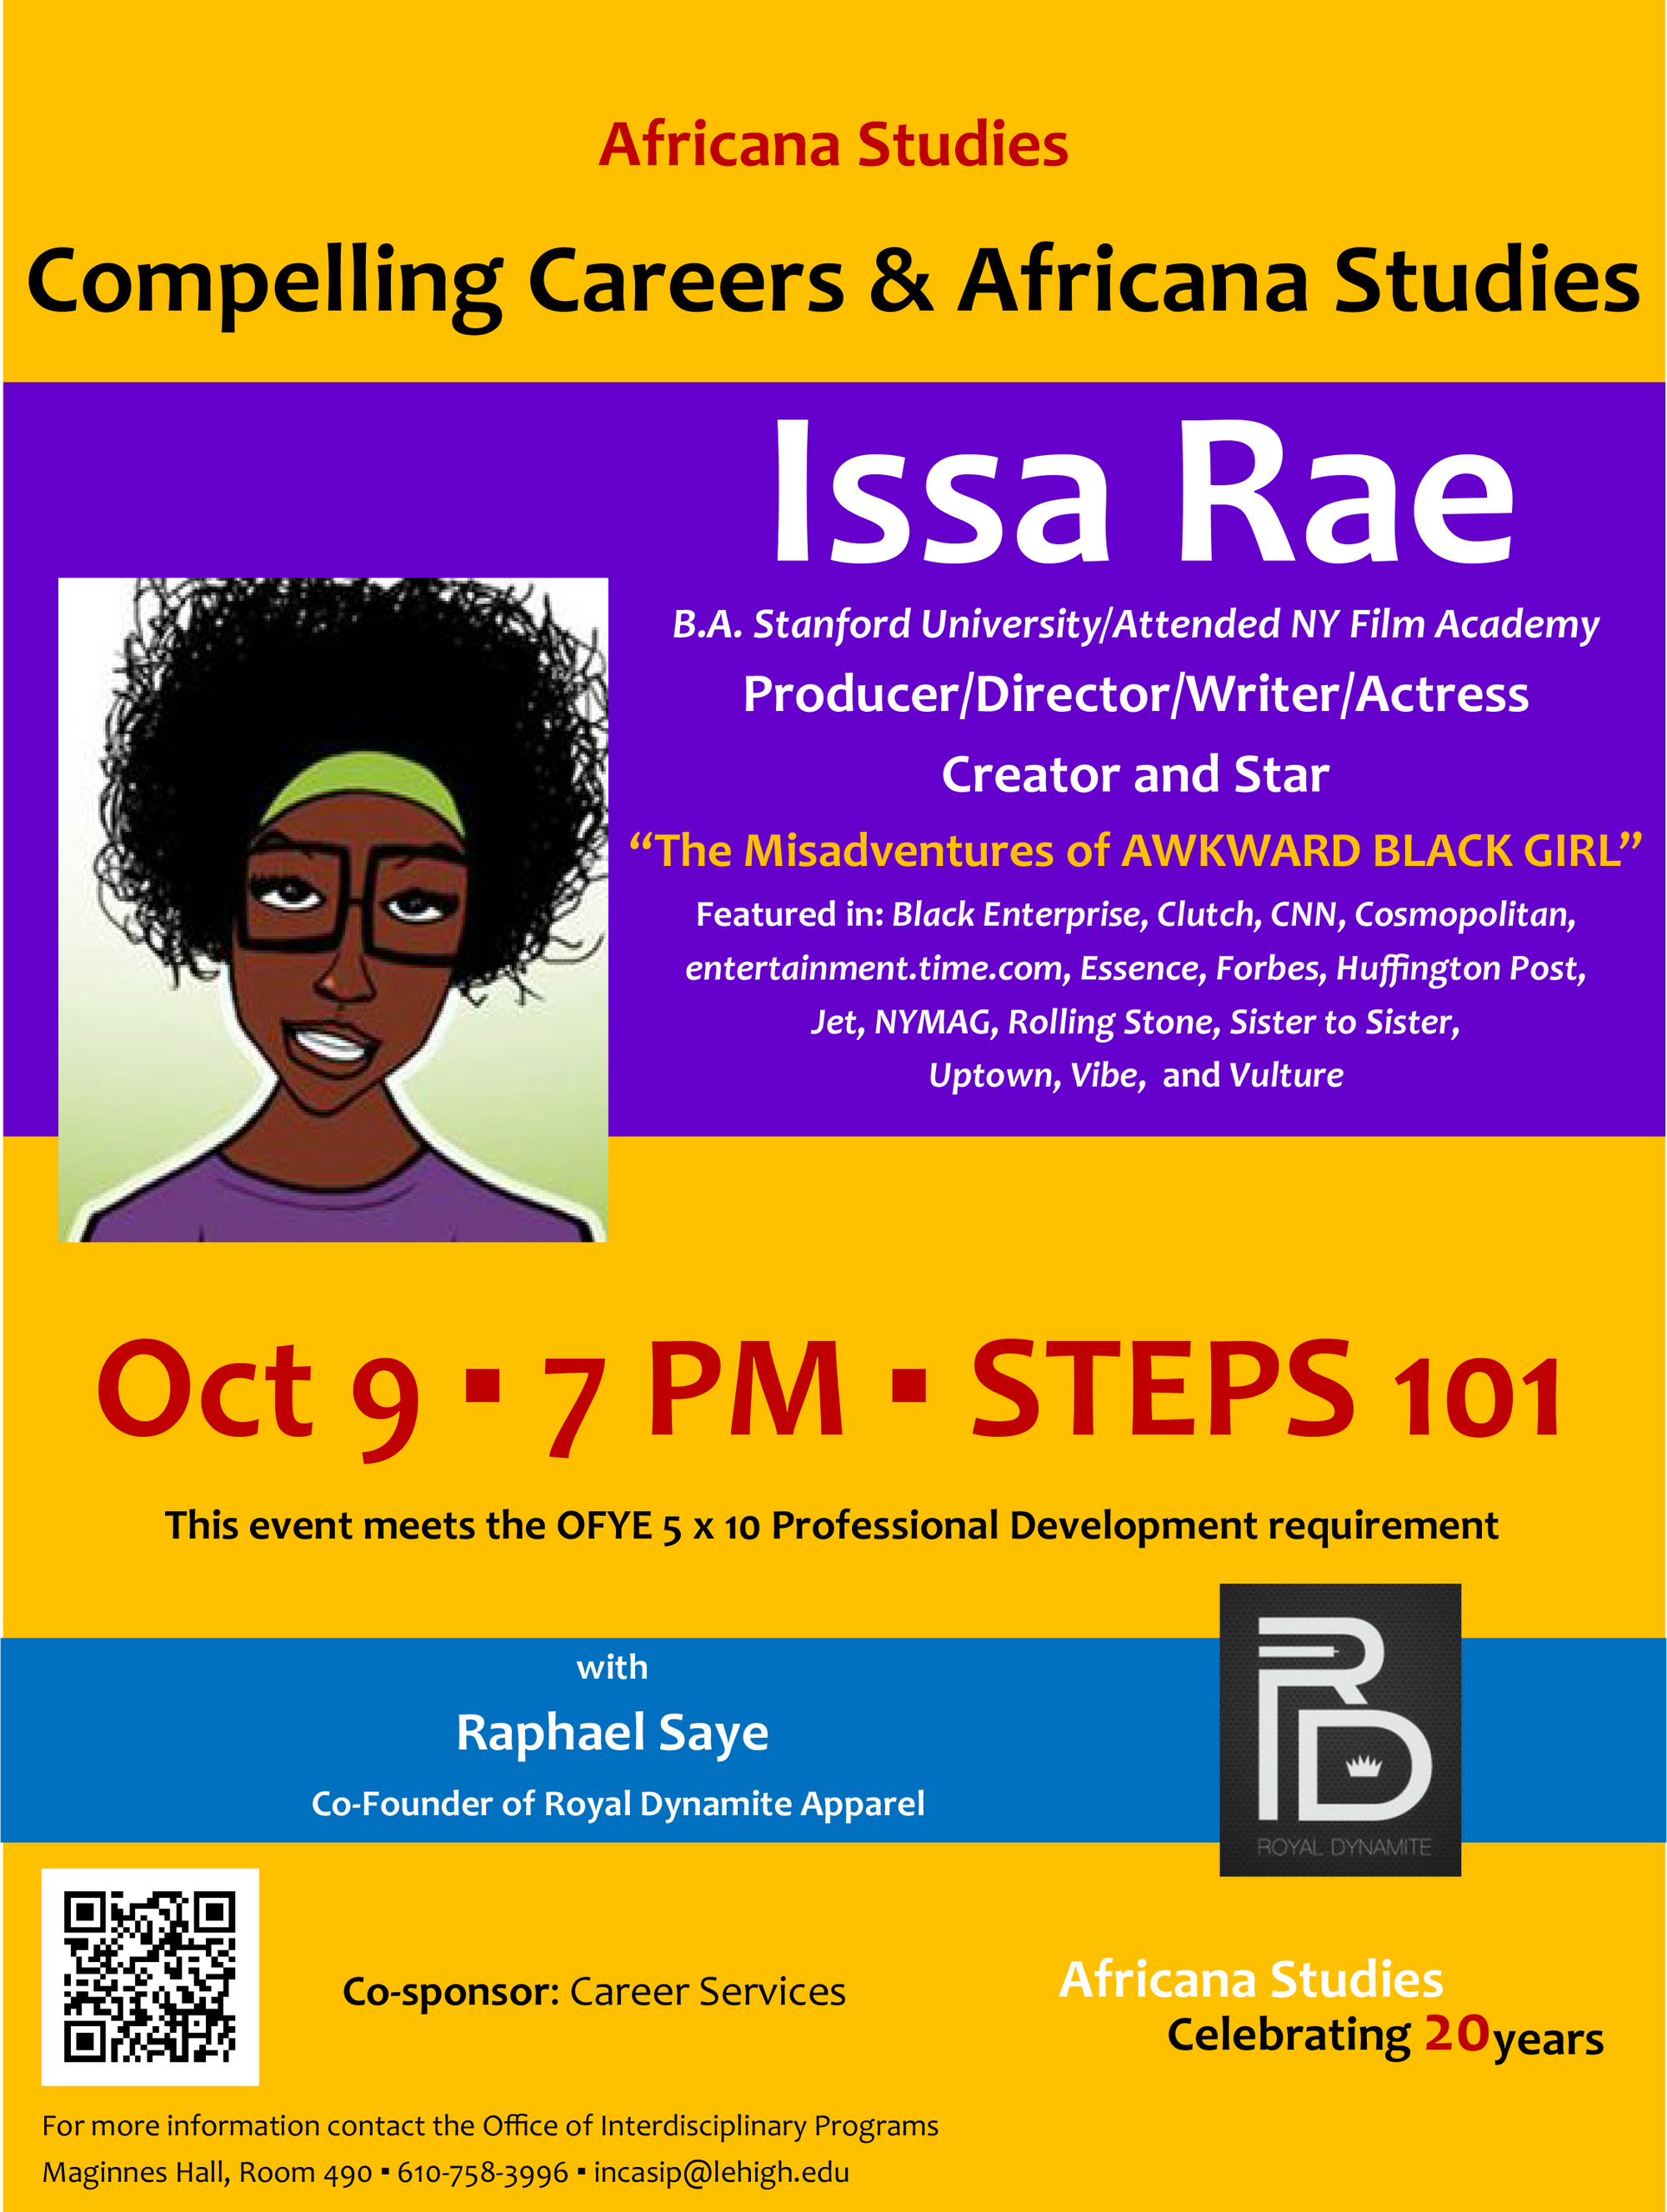 Leading Urban Clothing Line Partners with Issa Rae for Africana Studies Seminar at Lehigh University - Royal Dynamite